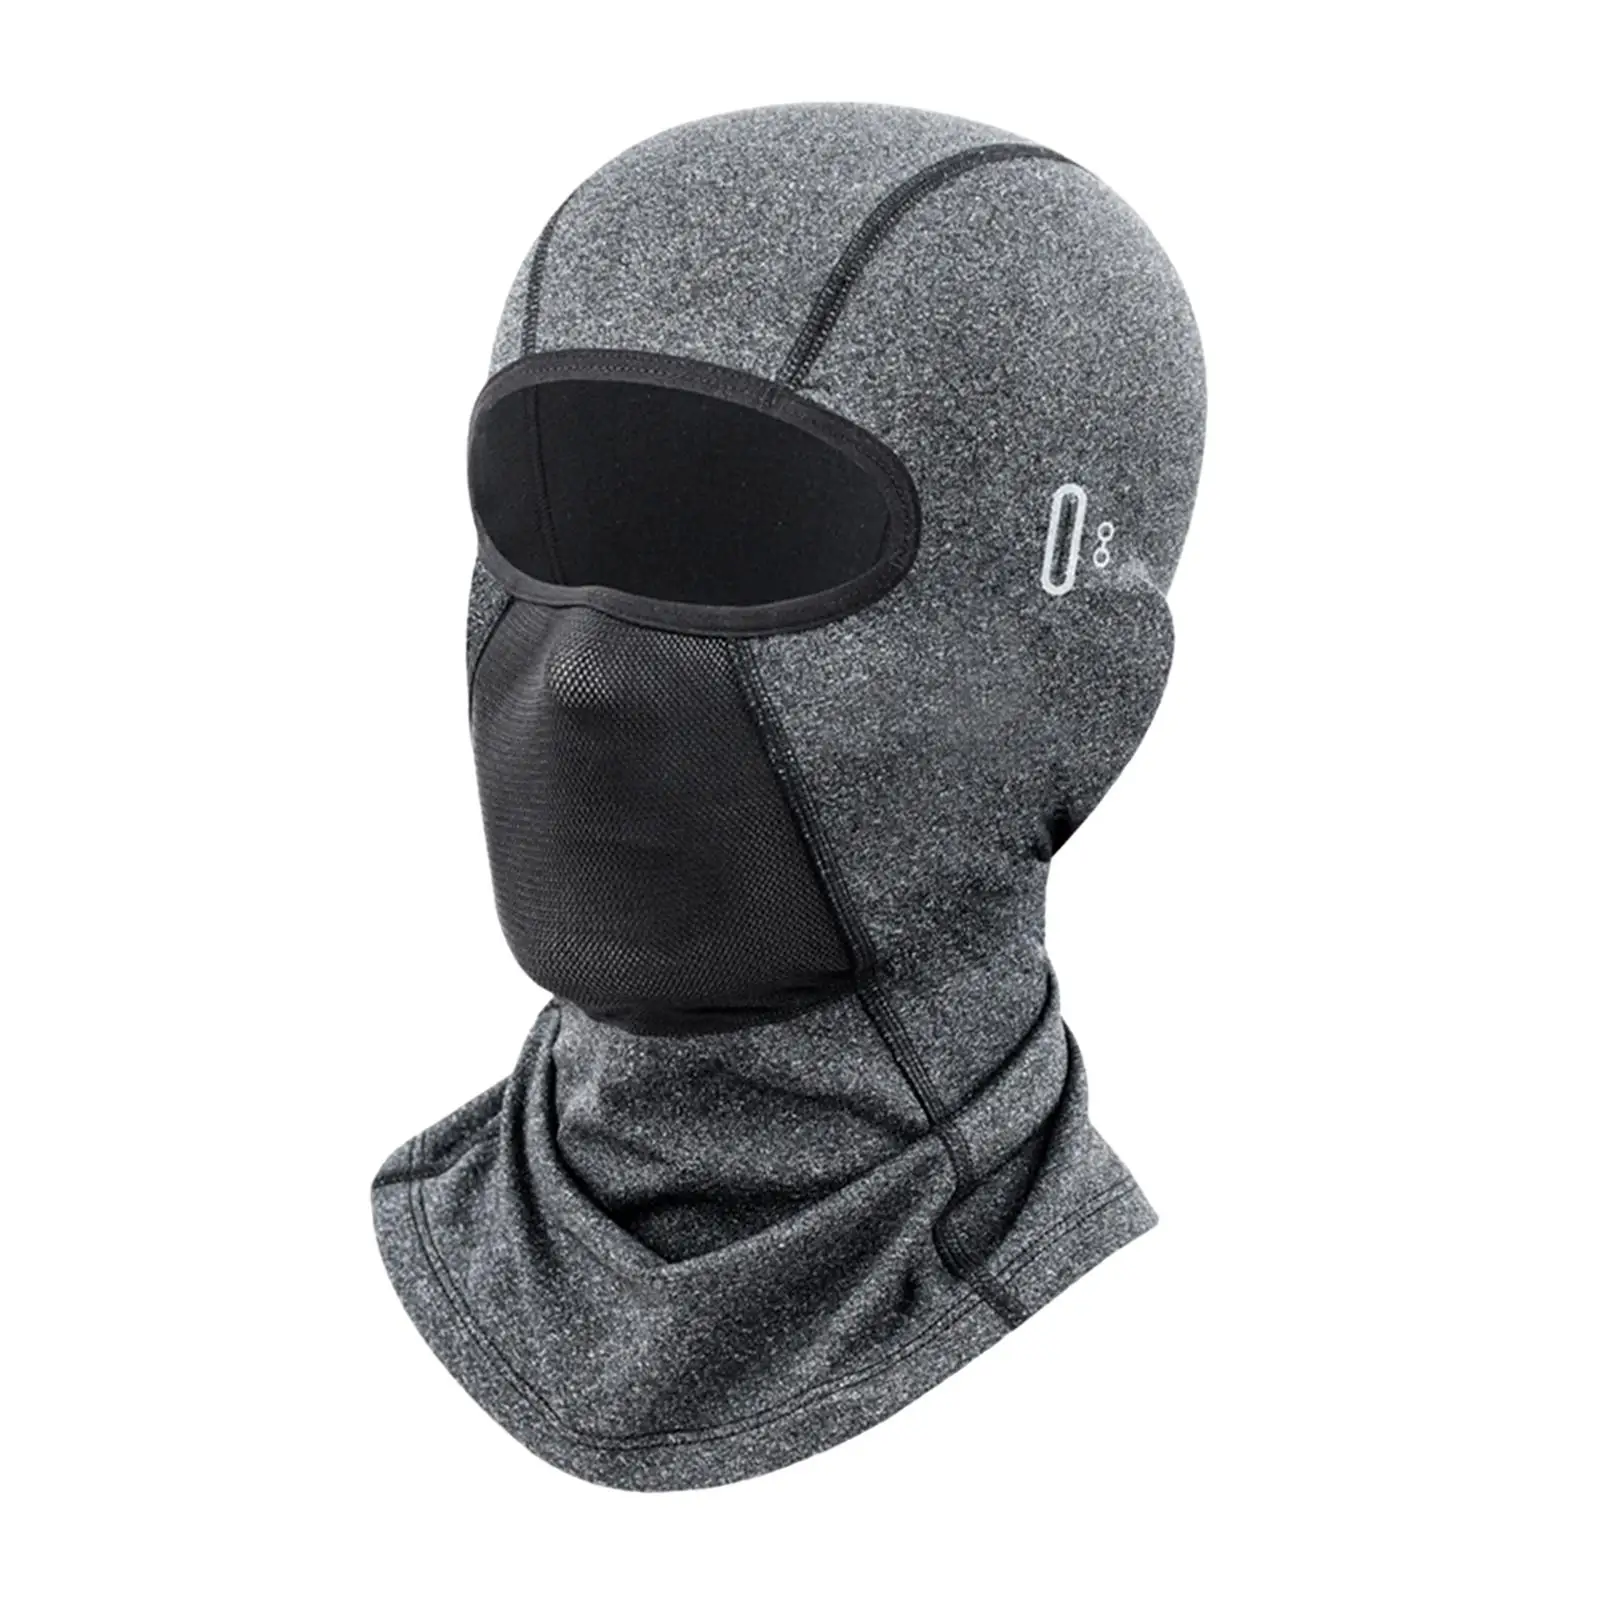 Ski Mask Headwear Winter Face Mask for Motorcycle Riding Hunting Hiking